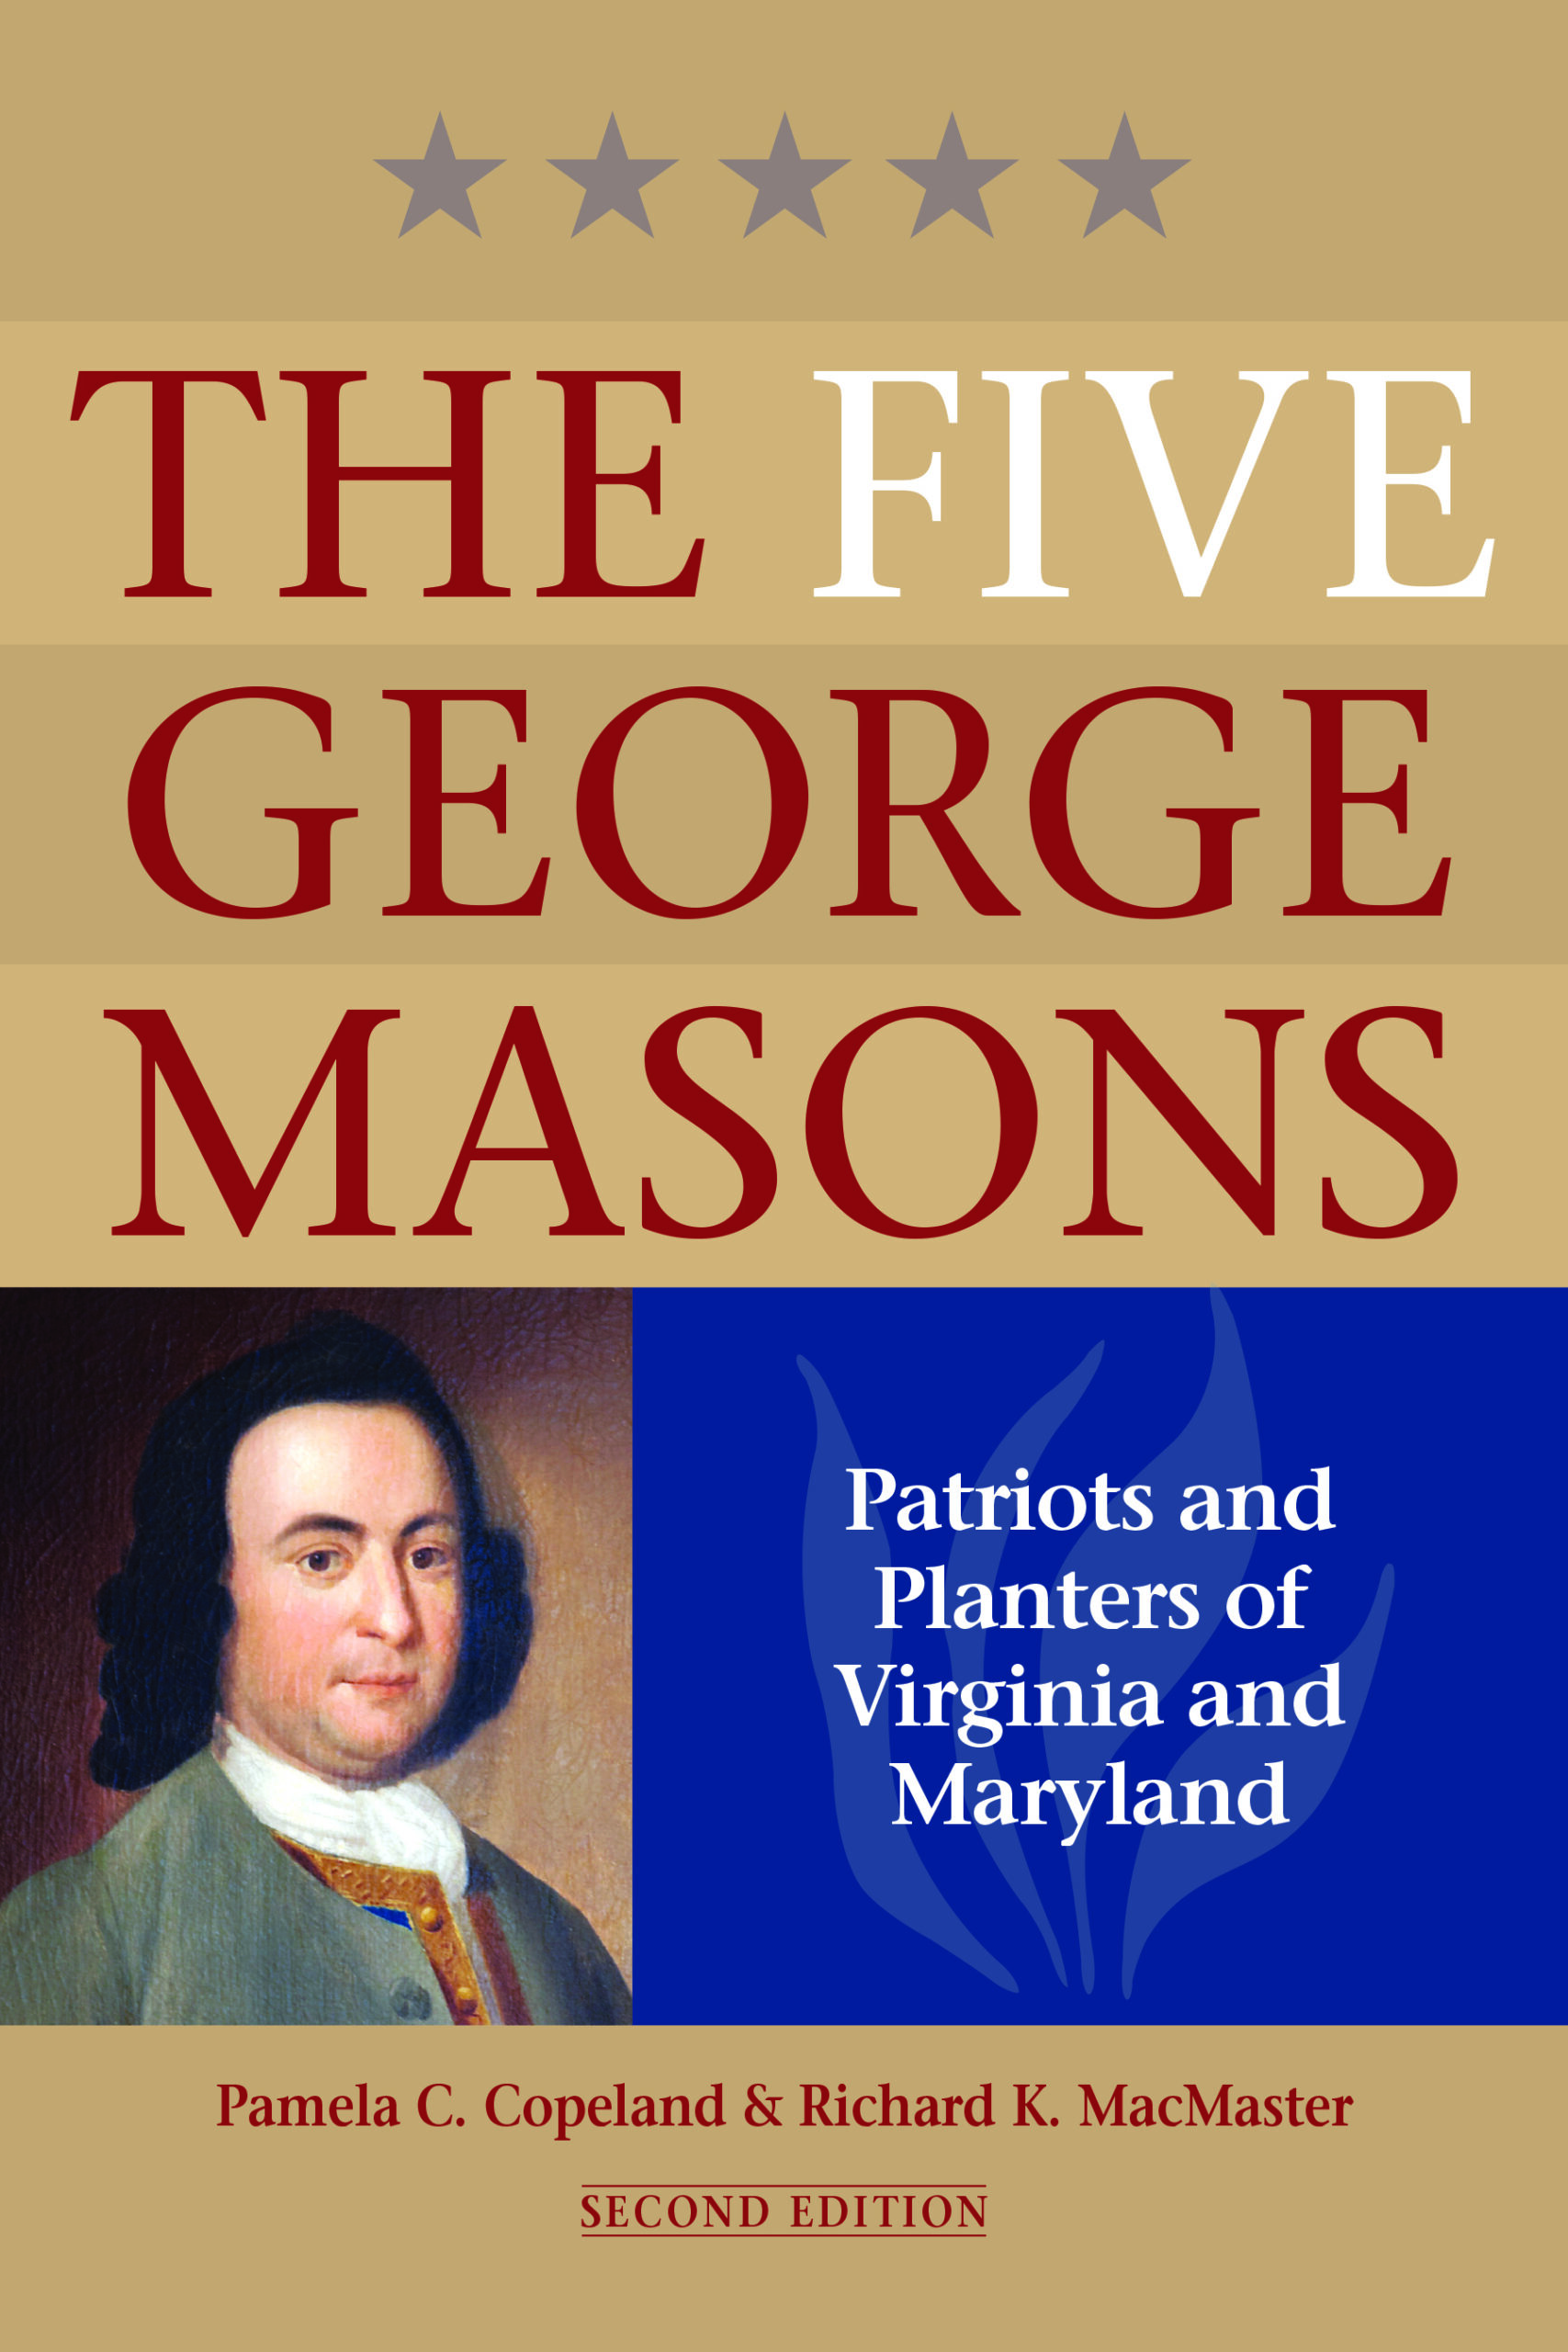 The Five George Masons: Patriots and Planters of Virginia and Maryland